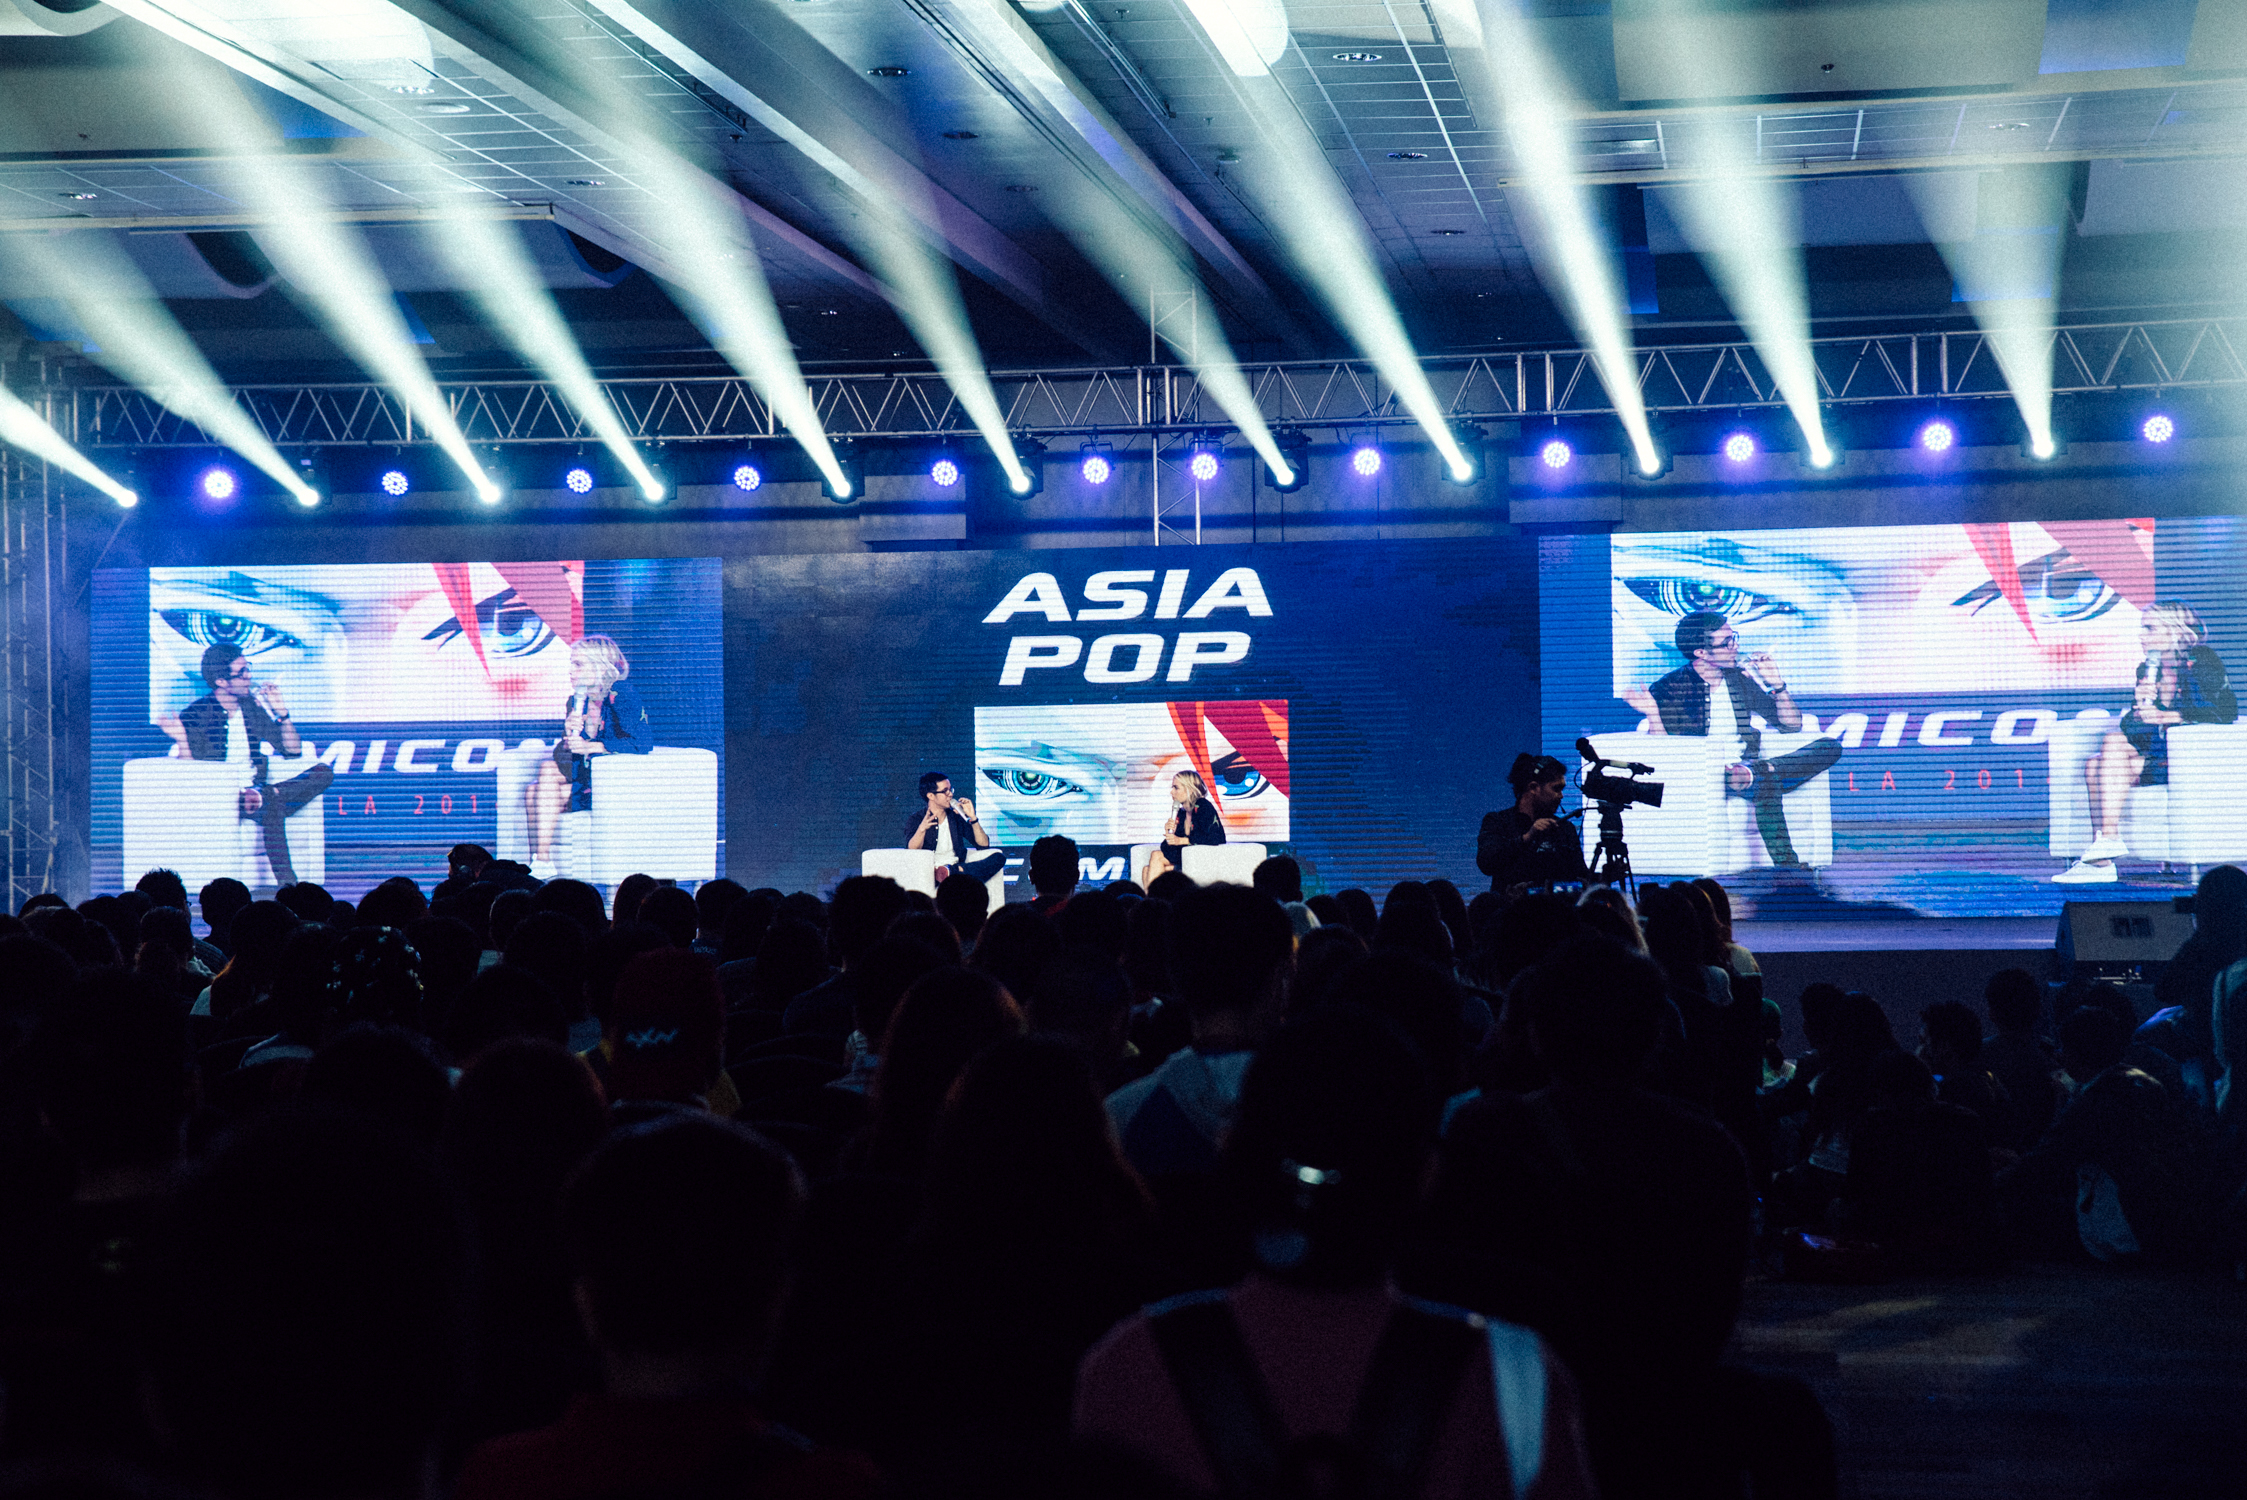 What We Learned At This Year’s Asia Pop Comic Con